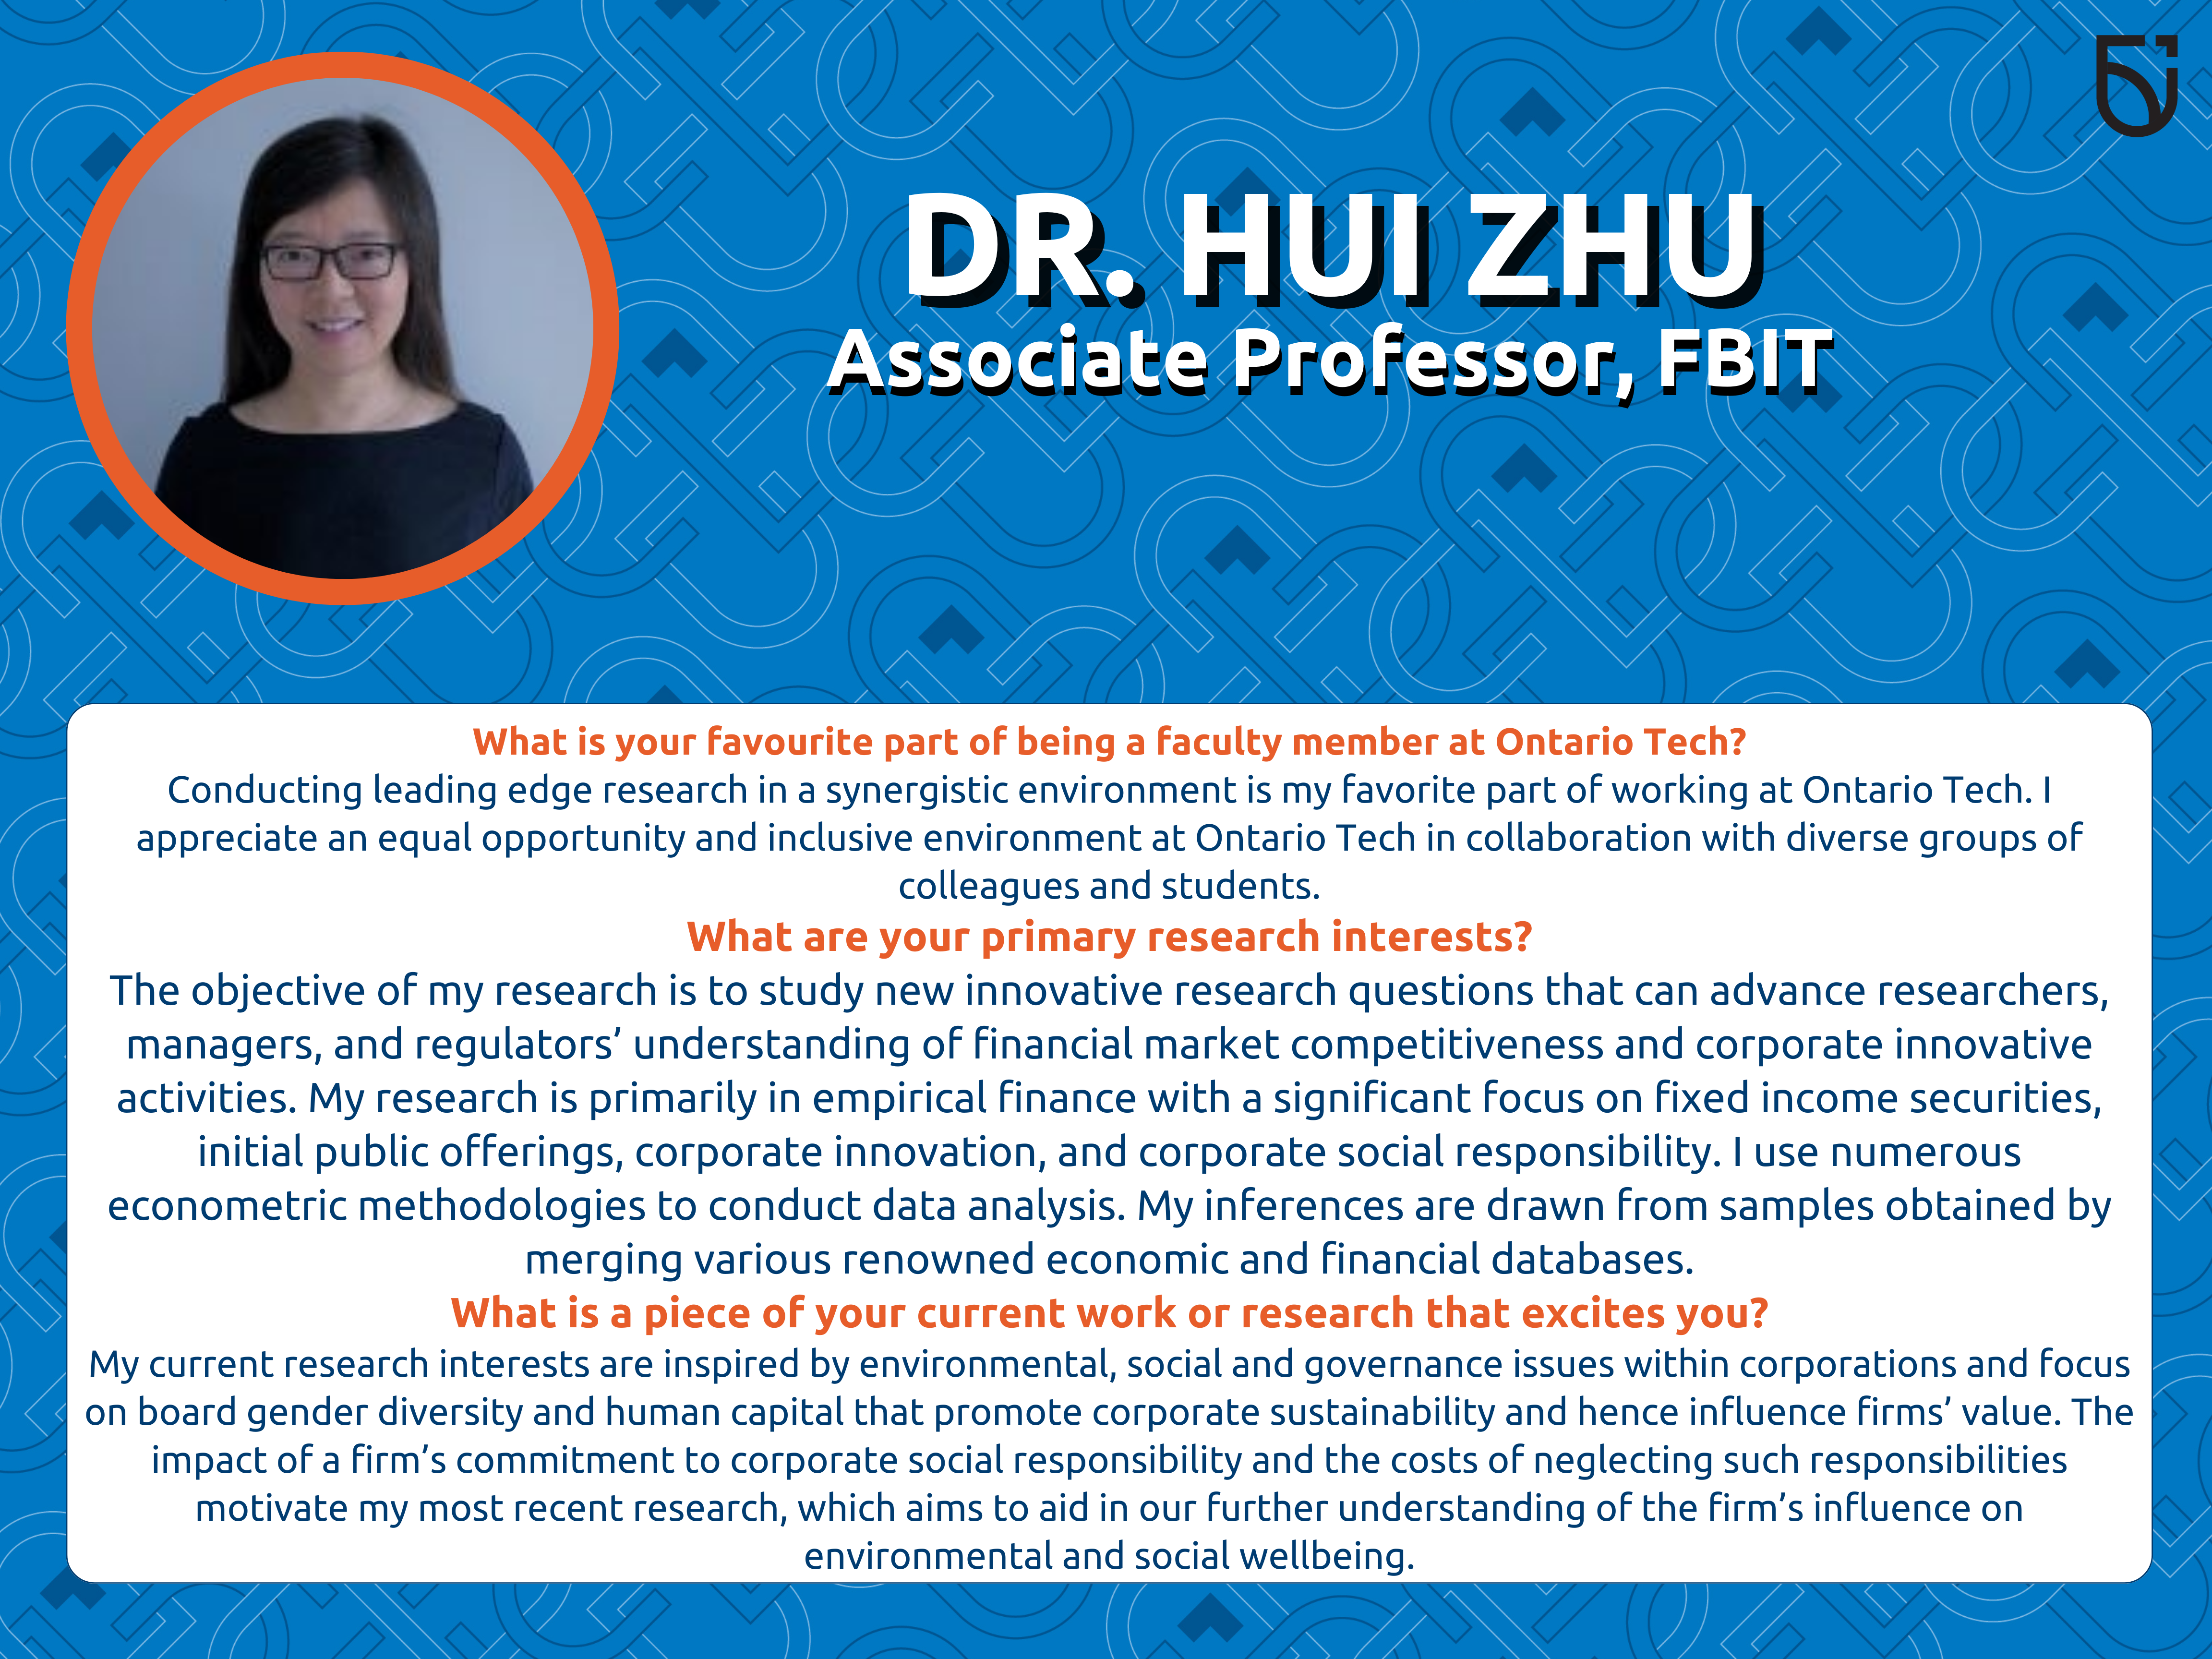 This photo is a Women’s Wednesday feature of Dr. Hui Zhu, an Associate Professor in the Faculty of Business and IT